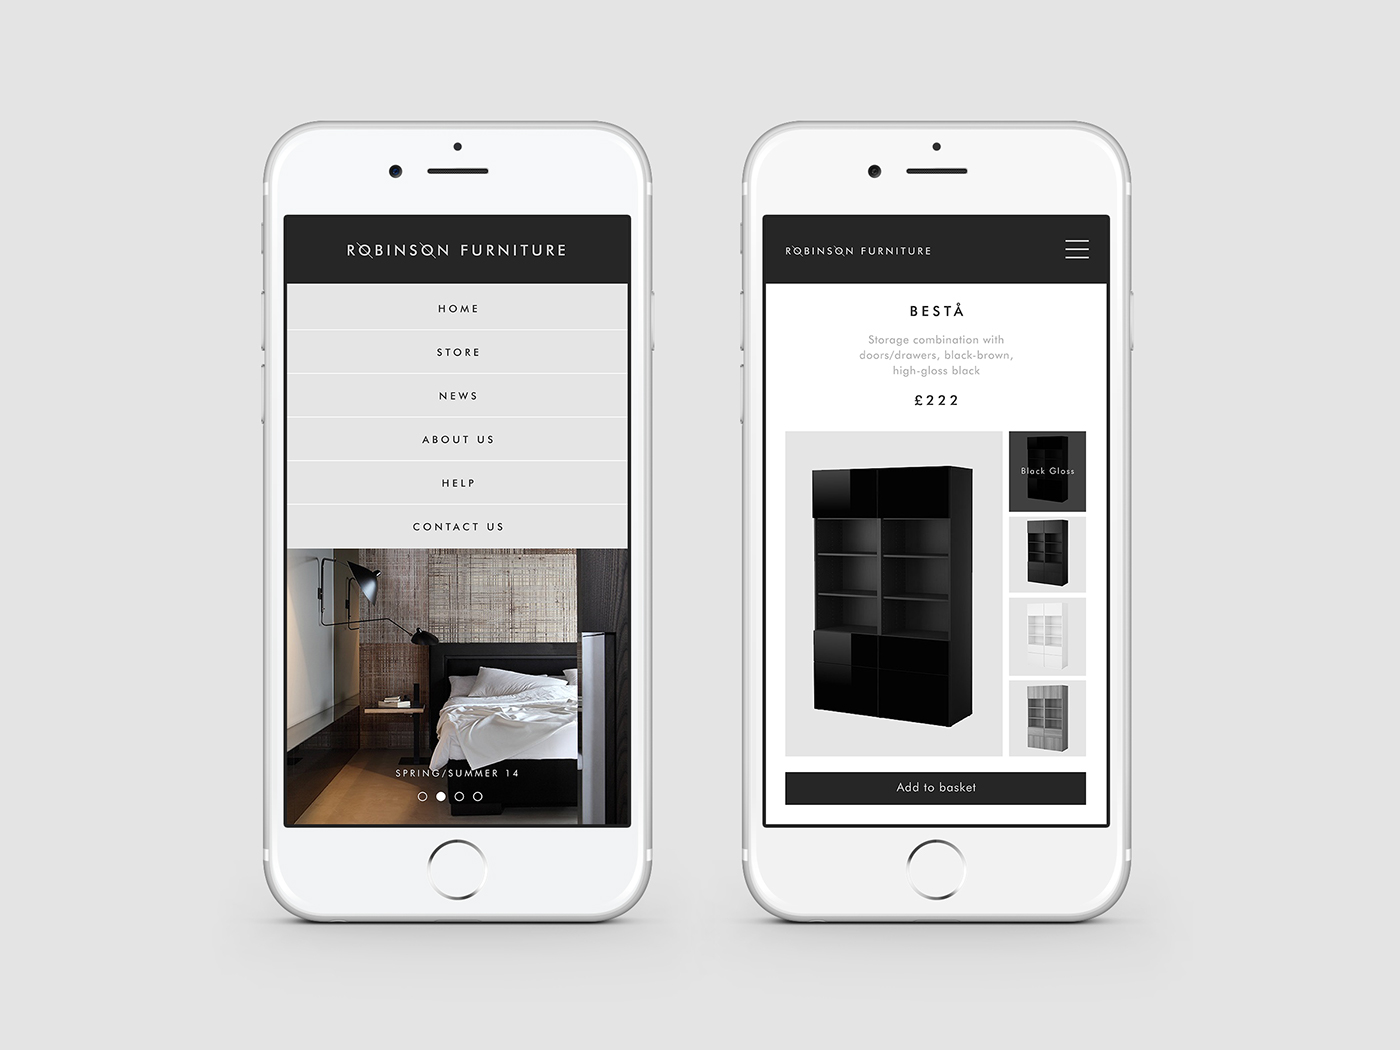 user experience Interface Responsive Web Layout type modern furniture e-commerce Online shop store ux UI